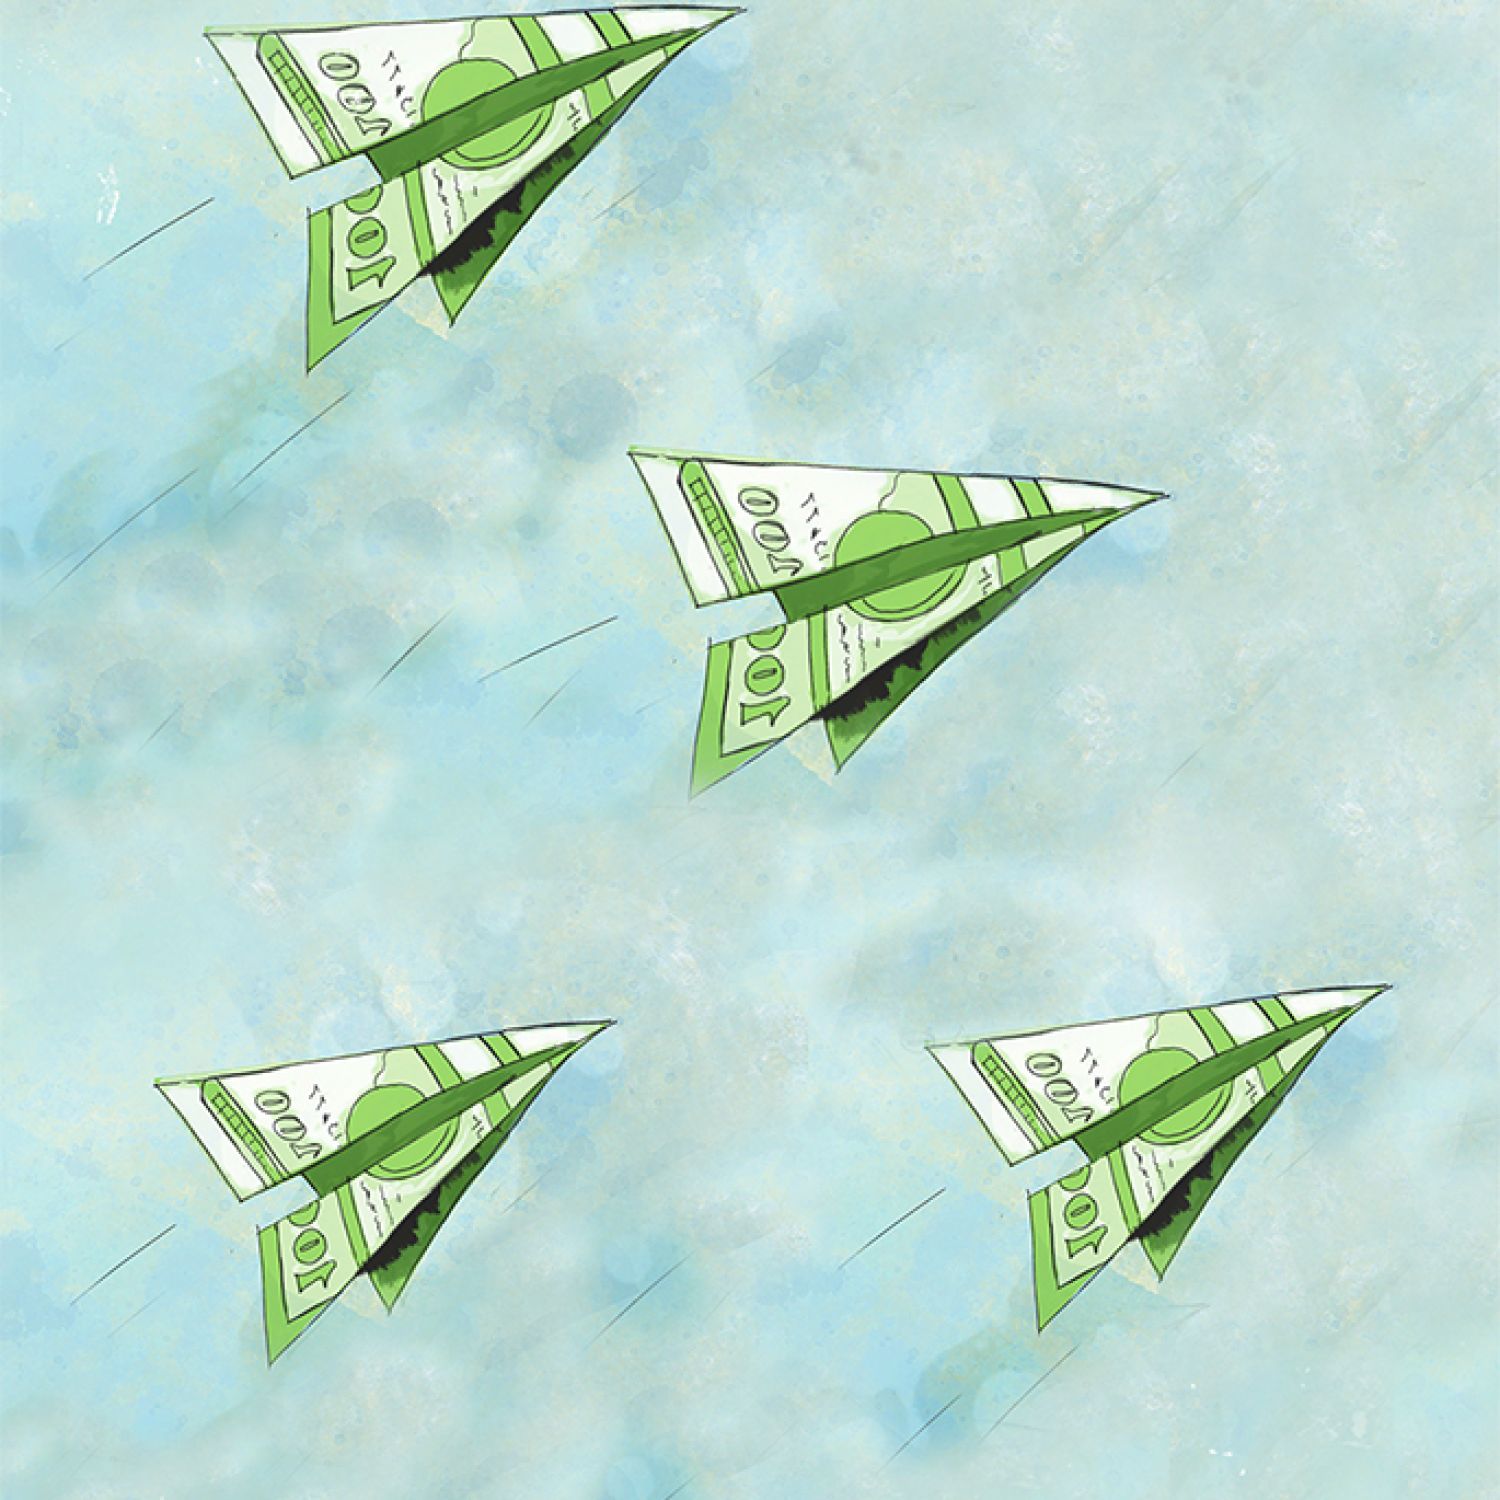 Four paper airplanes made from dollar bills | ROI